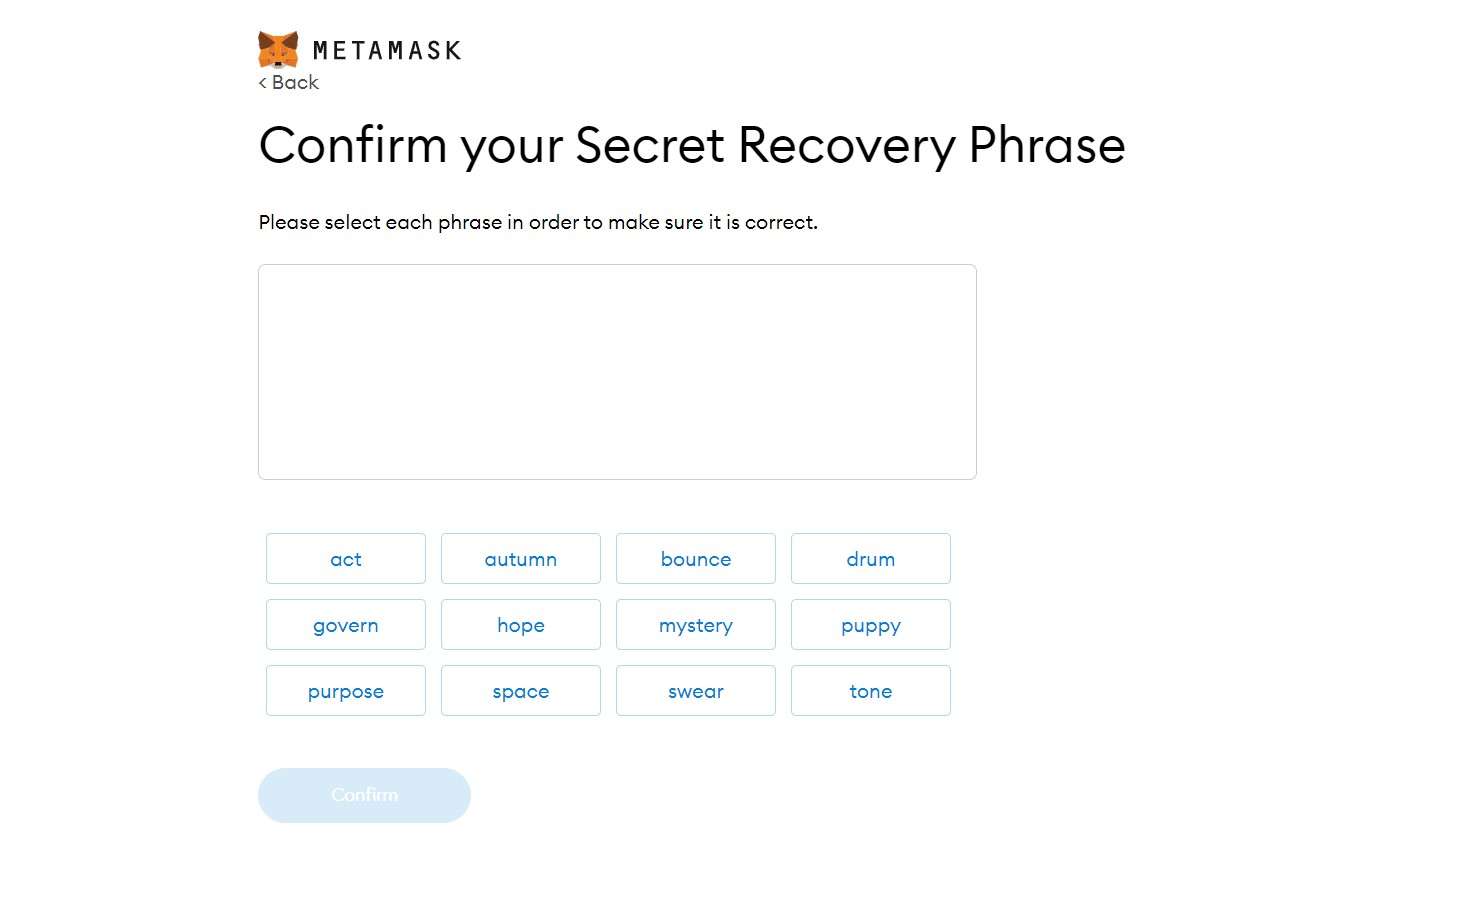 9. Confirm Your Secret Recovery Phase